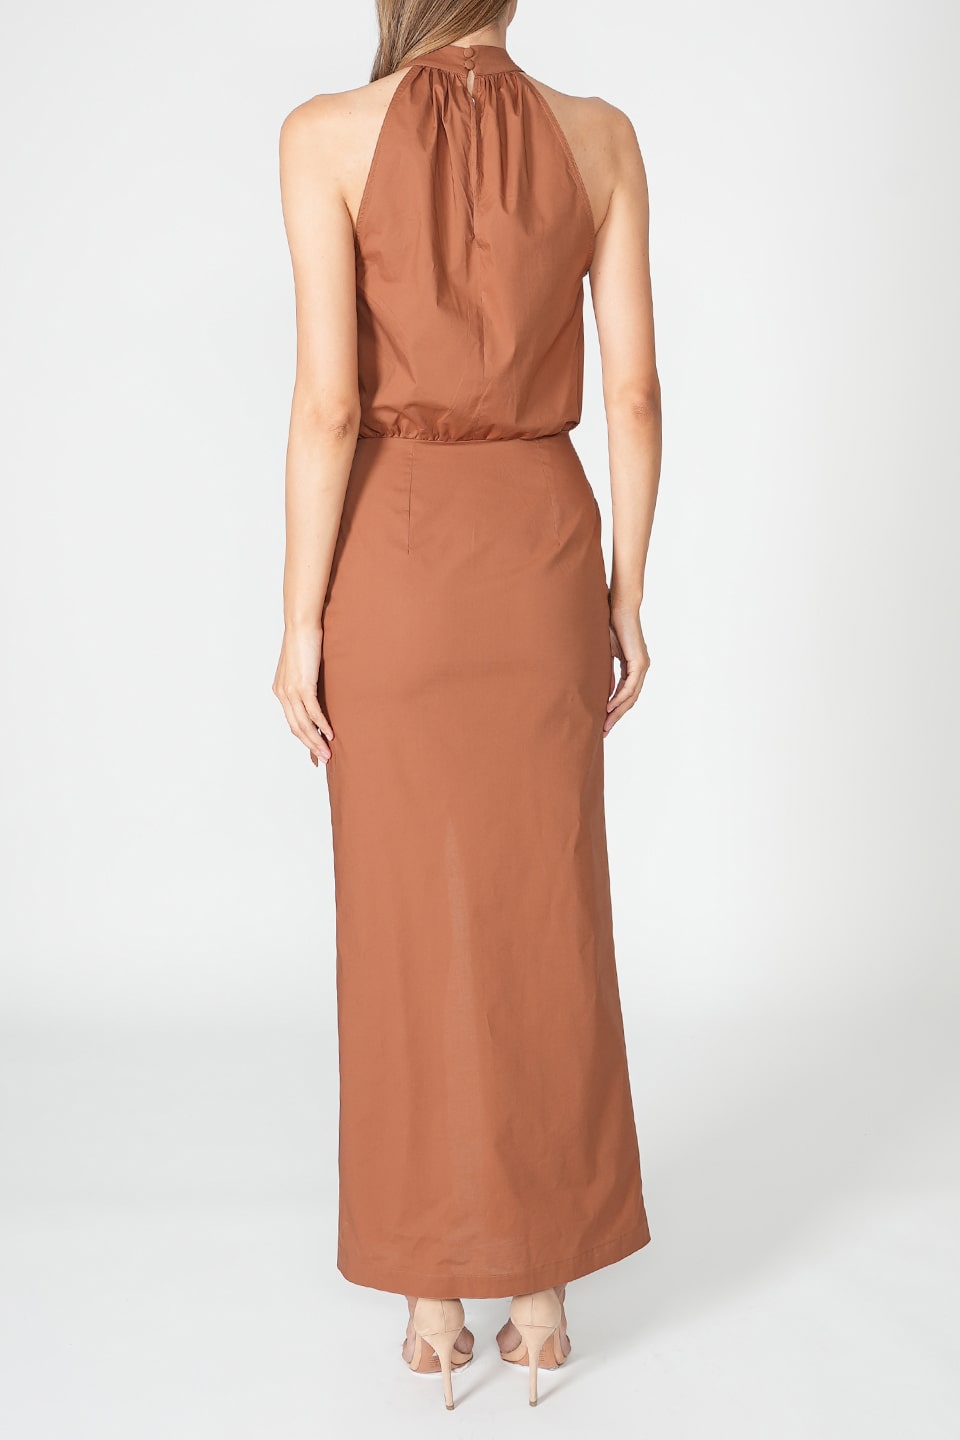 Designer Chocolate Midi dresses, shop online with free delivery in UAE. Product gallery 6